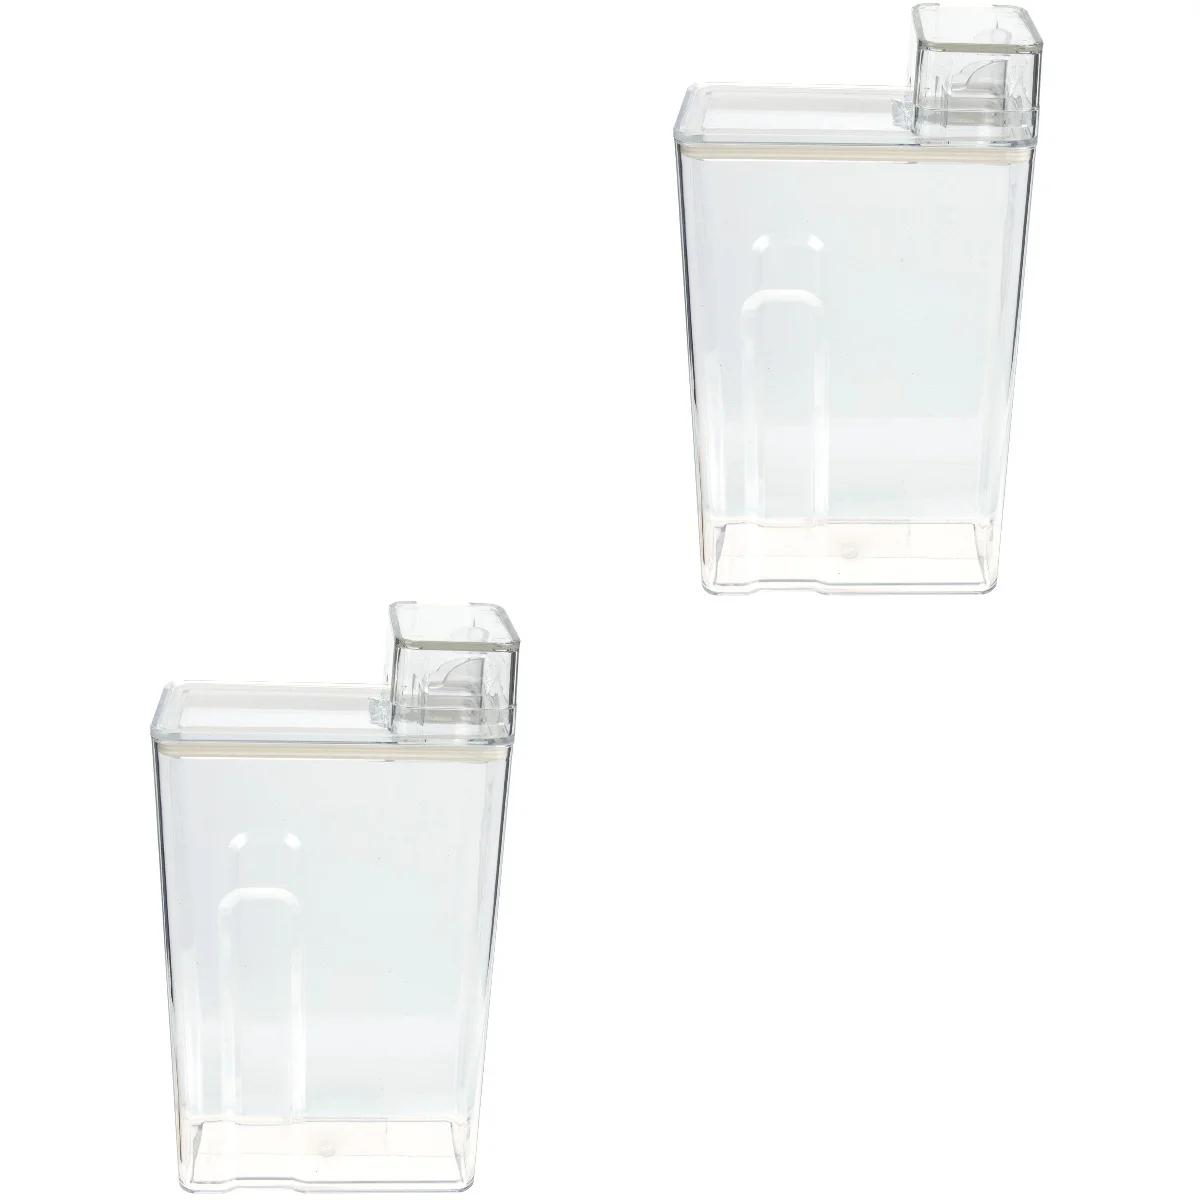 

2 Pack Laundry Detergent Storage Box Liquid Sub Bottle Refillable Lotion Holder Glass Food Jars Bottles Travel Container